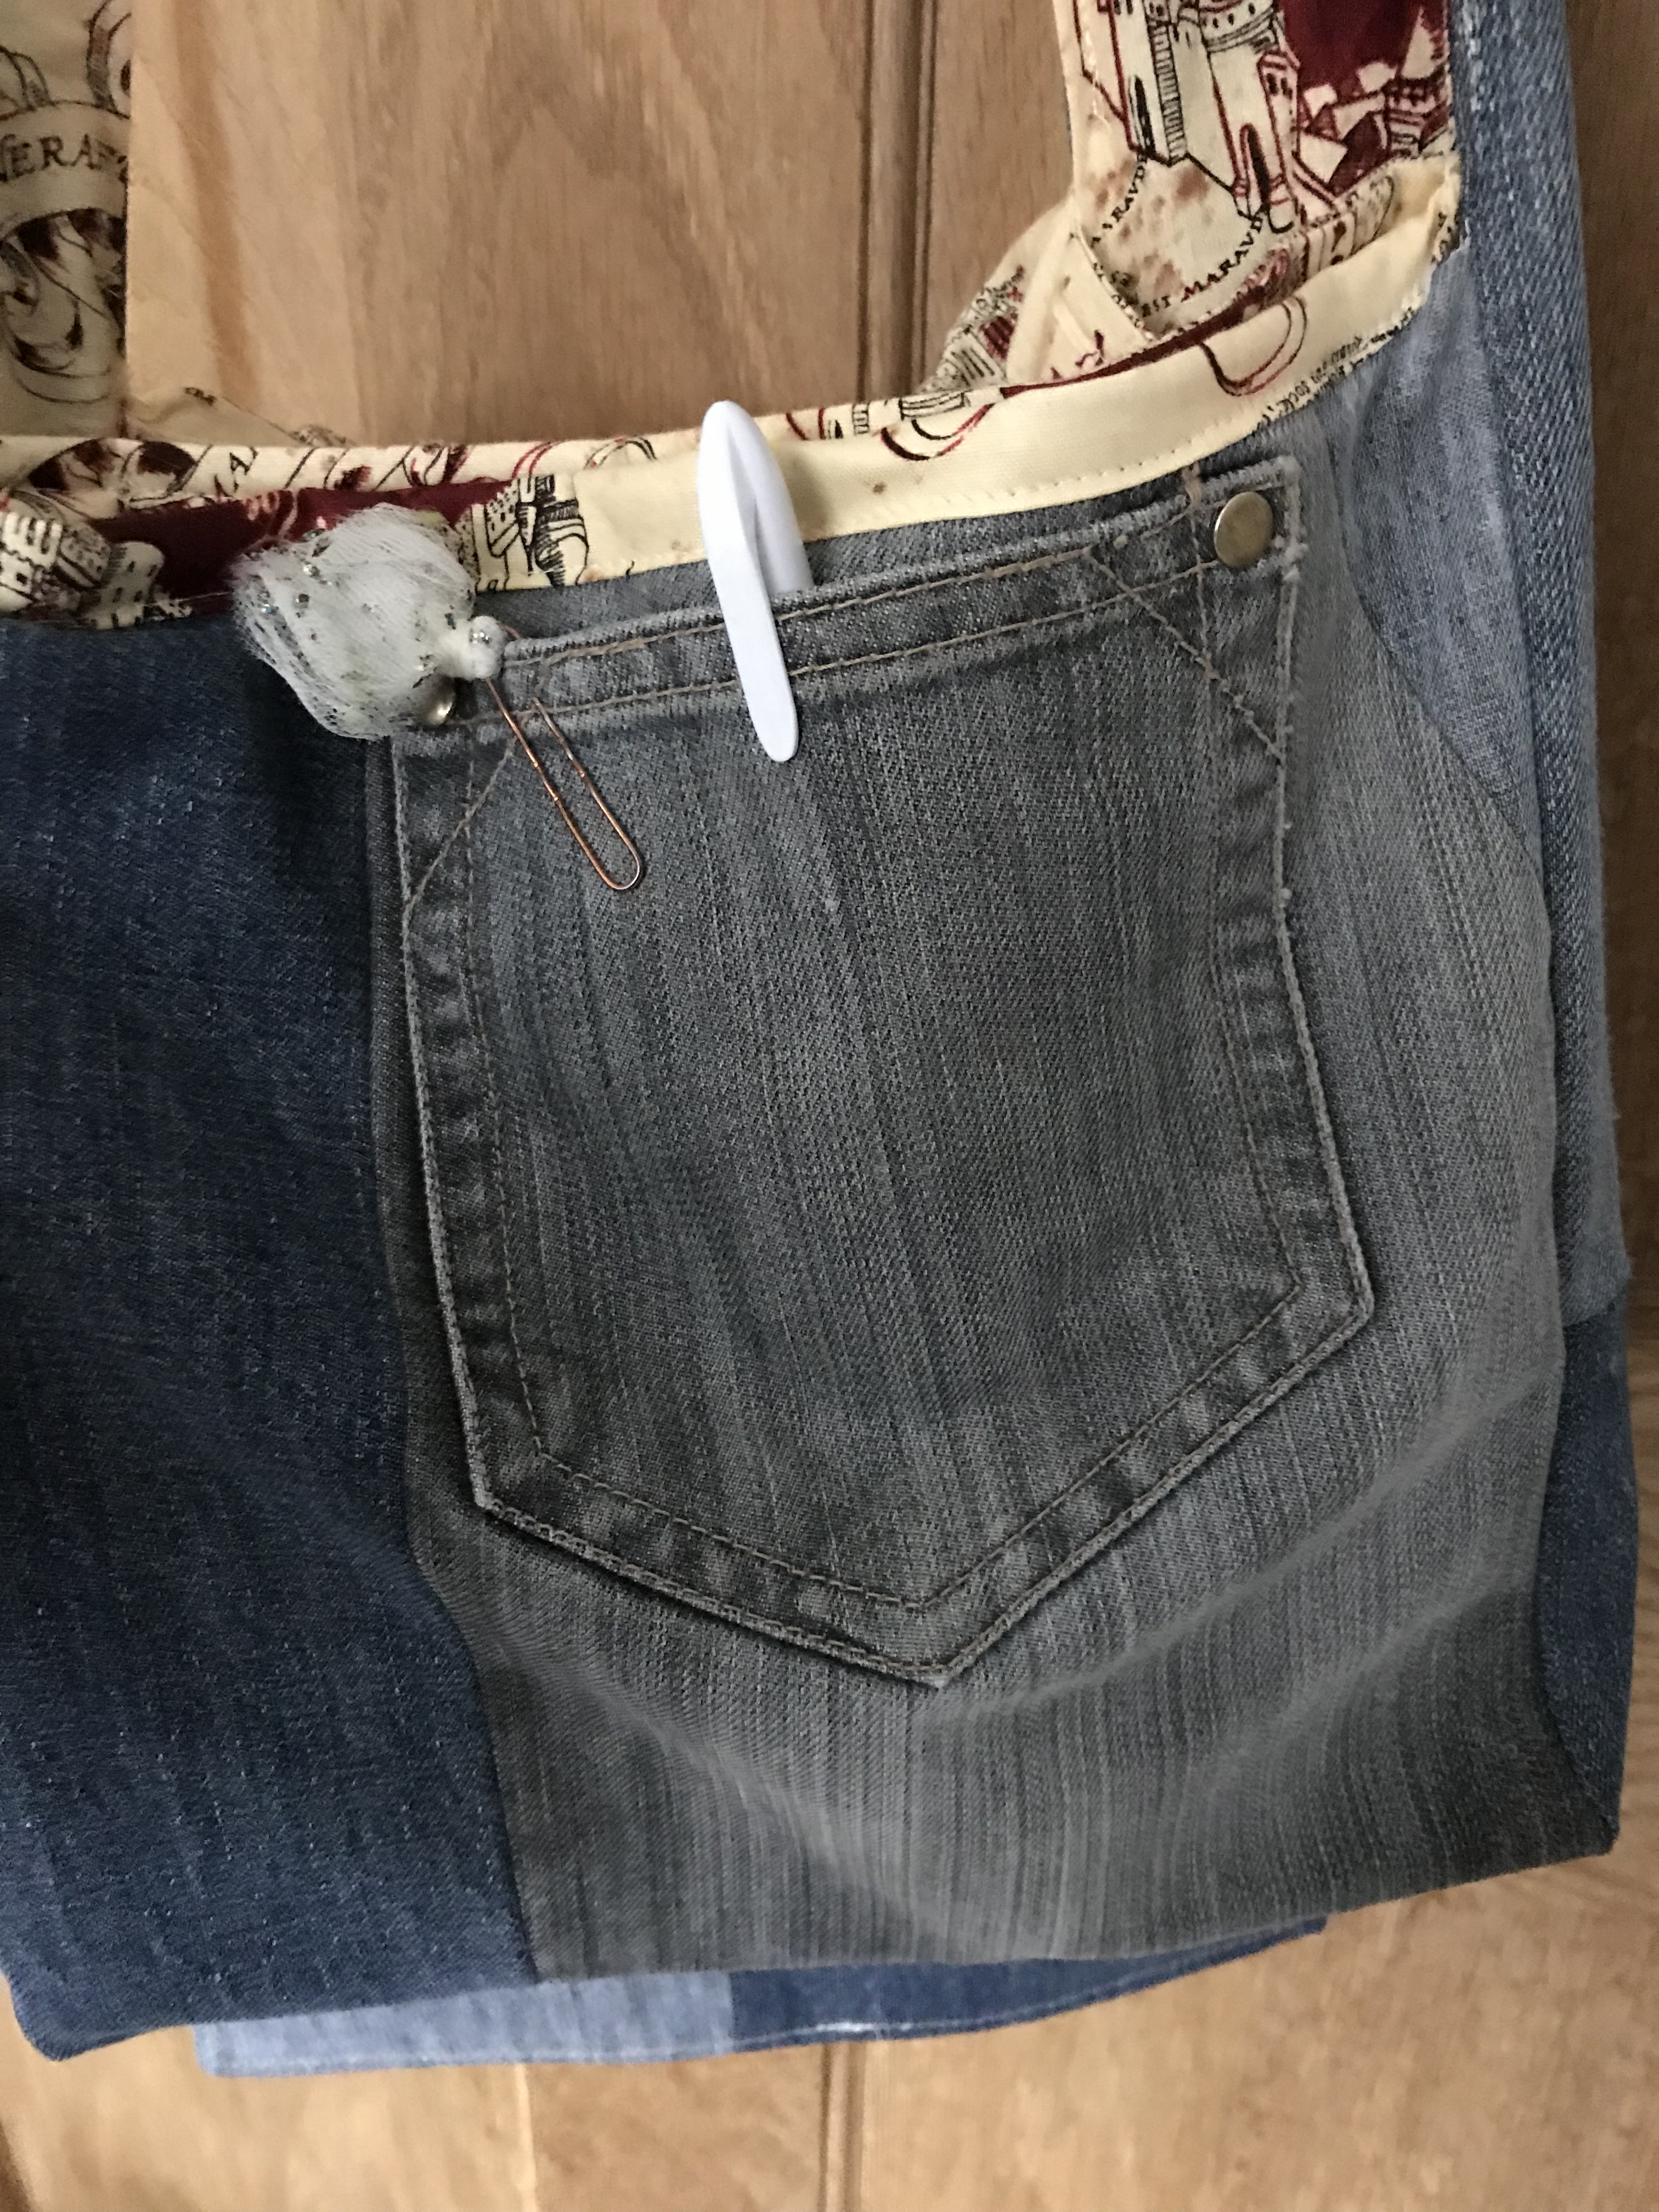 Handmade haven messenger bag, made from repurposed jeans with handy pocket